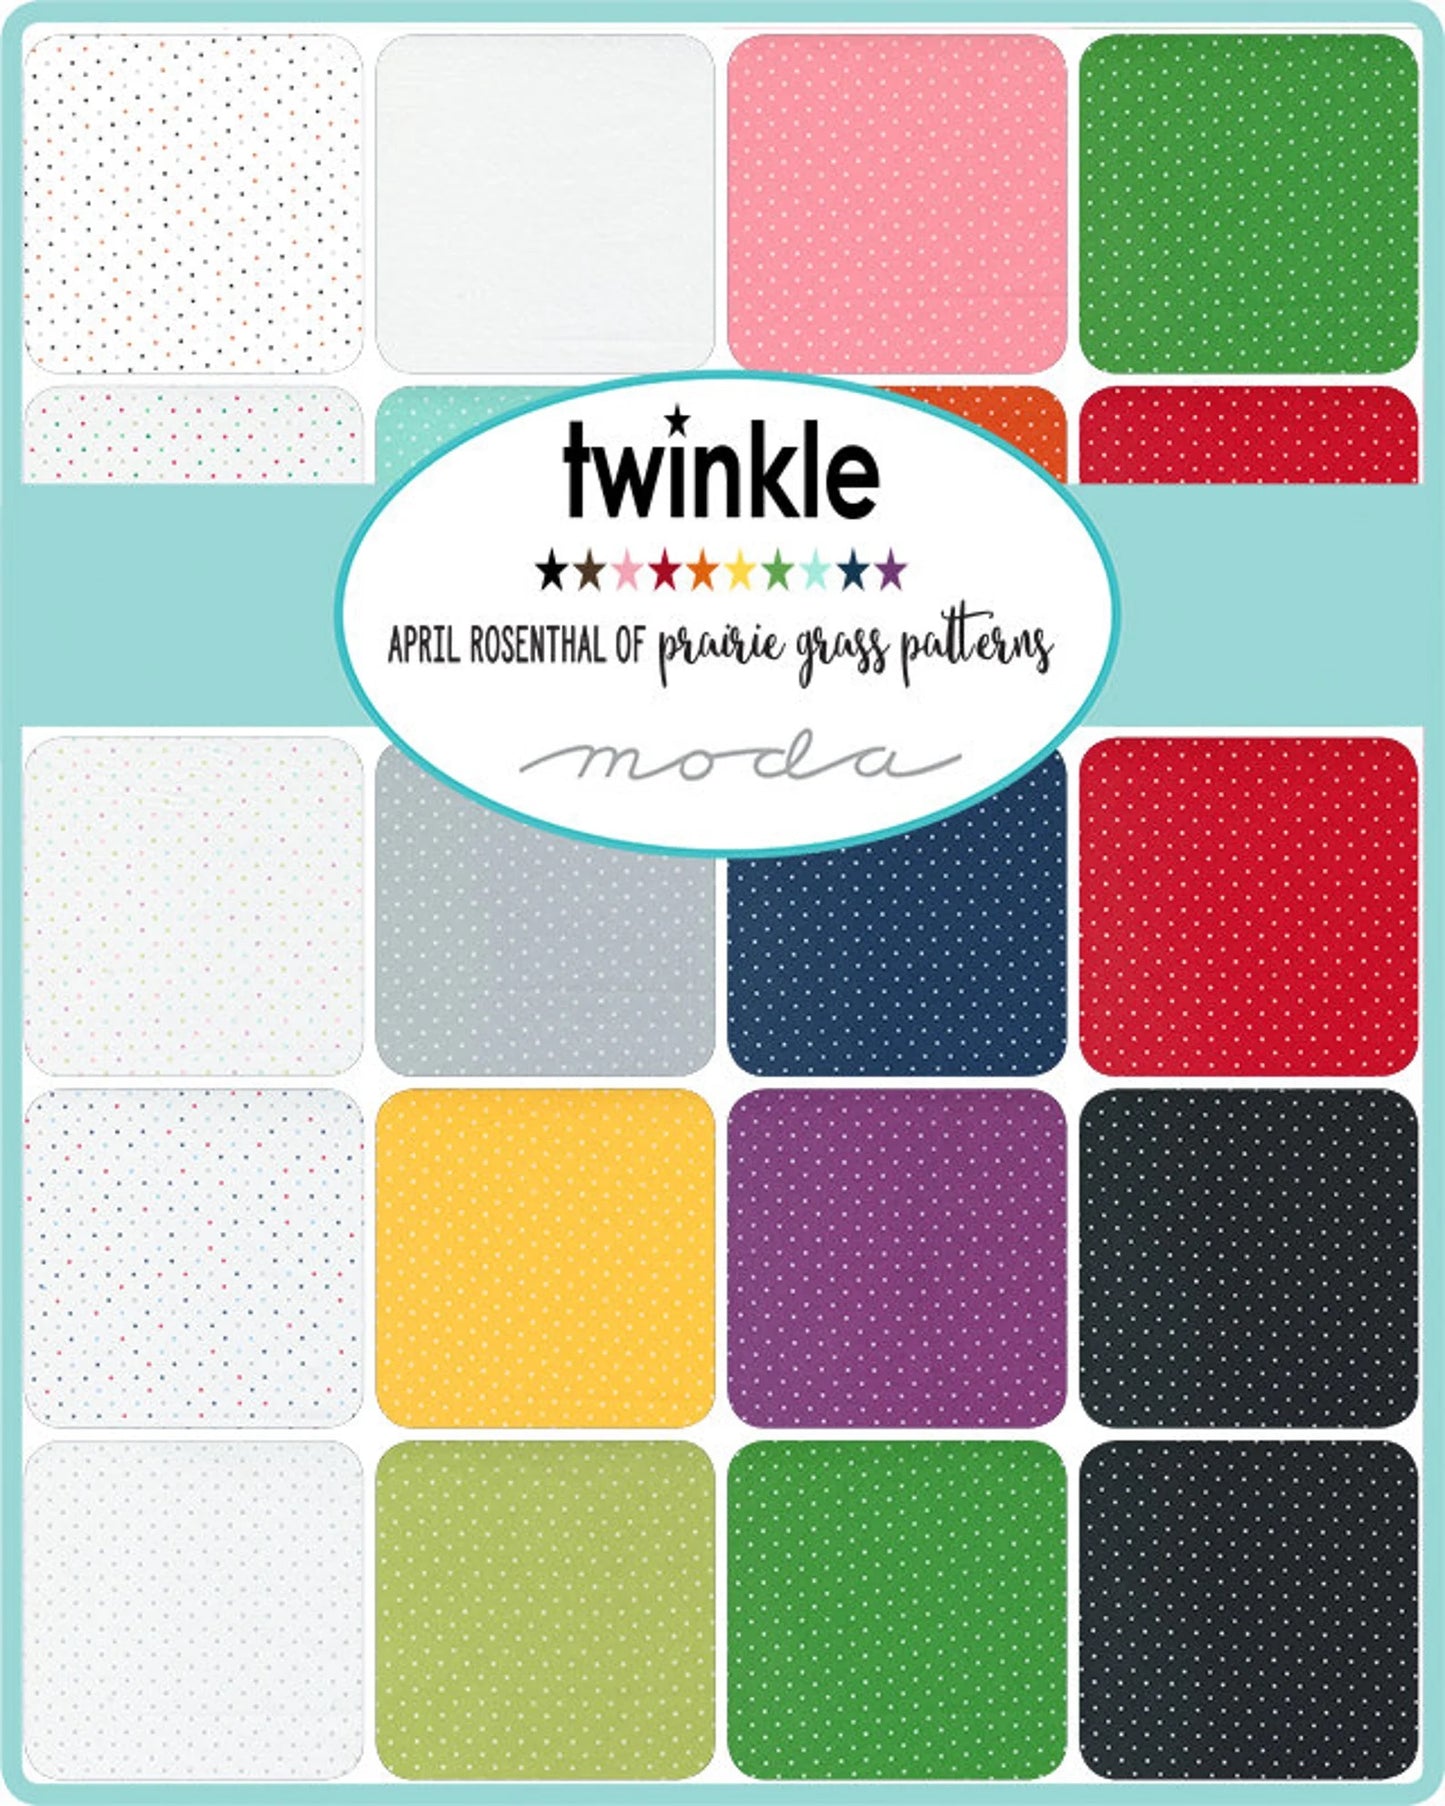 Twinkle 5" Charm Pack Fabric